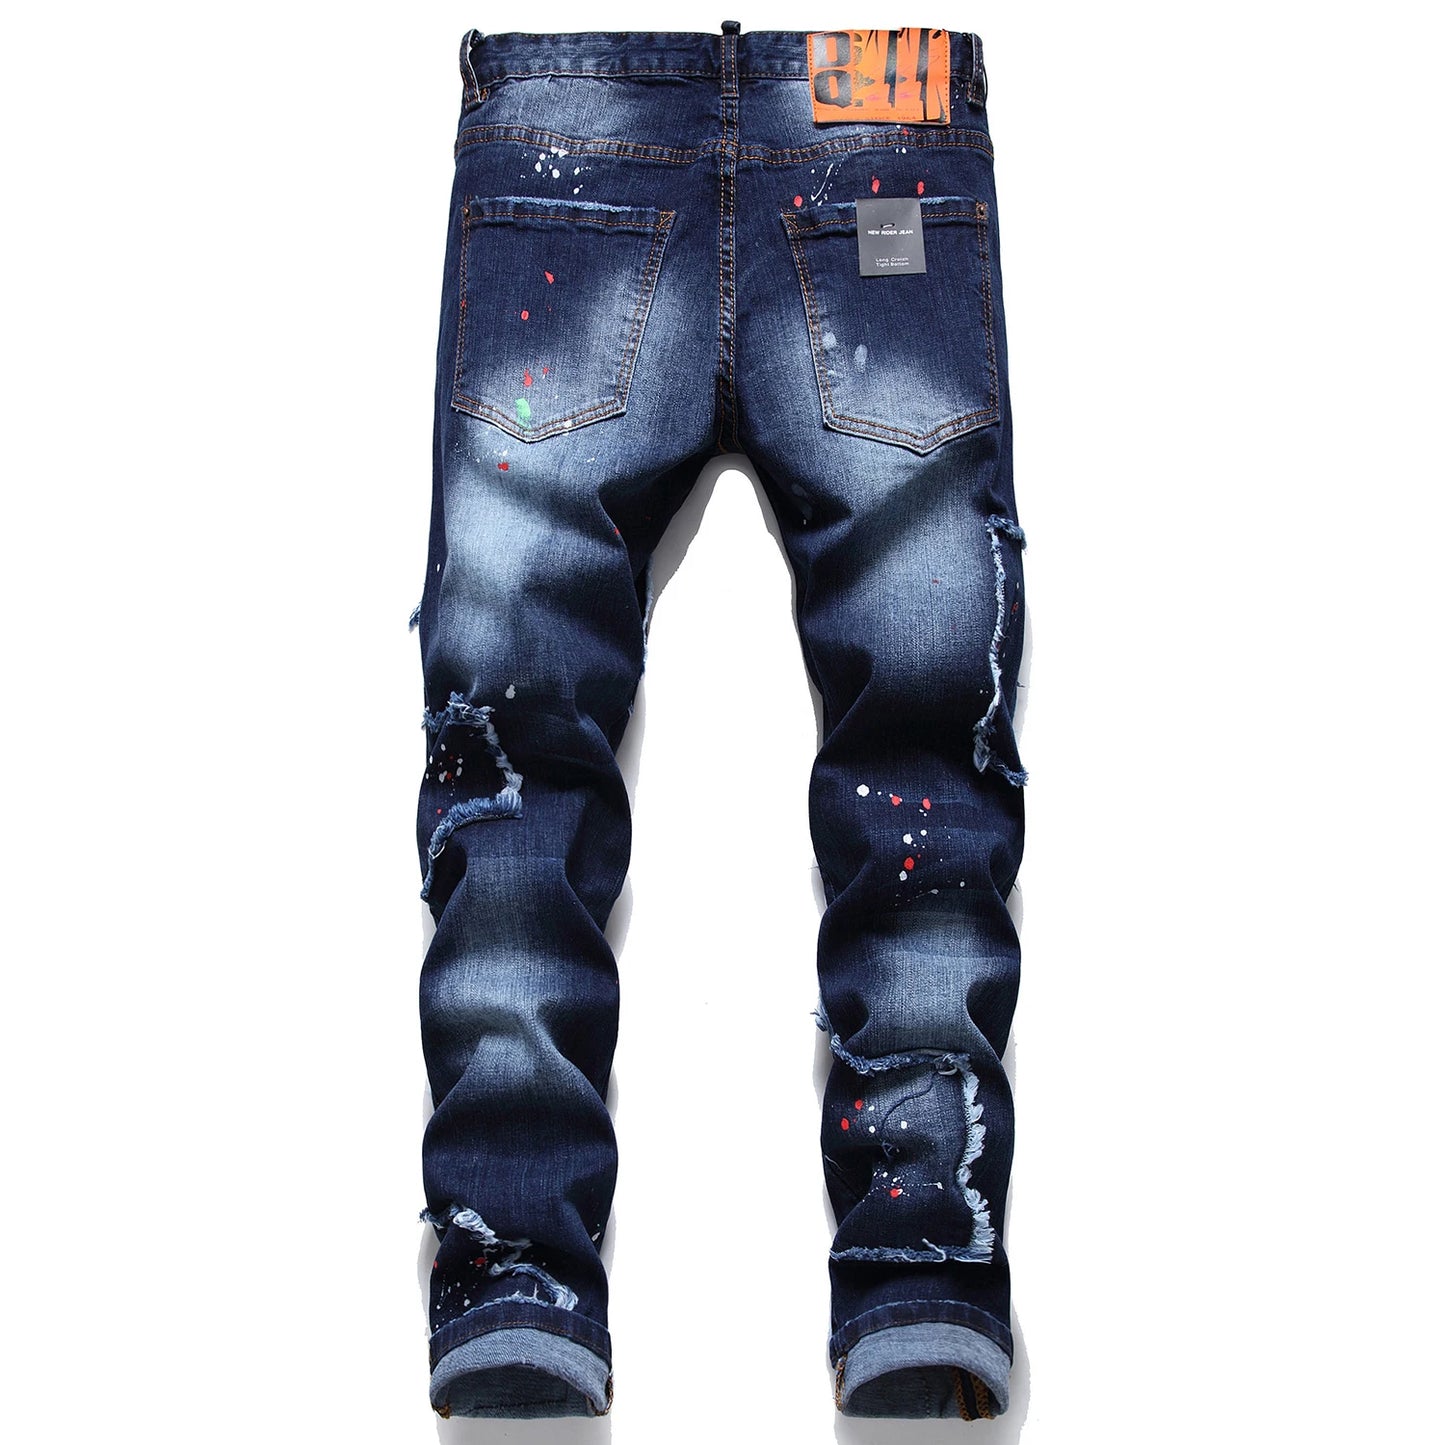 Light Luxury Men’s Slim-fit Patches Blue Jeans,High Quality Dot Paint Print Beggar Jeans,  Stylish Sexy Street Jeans;